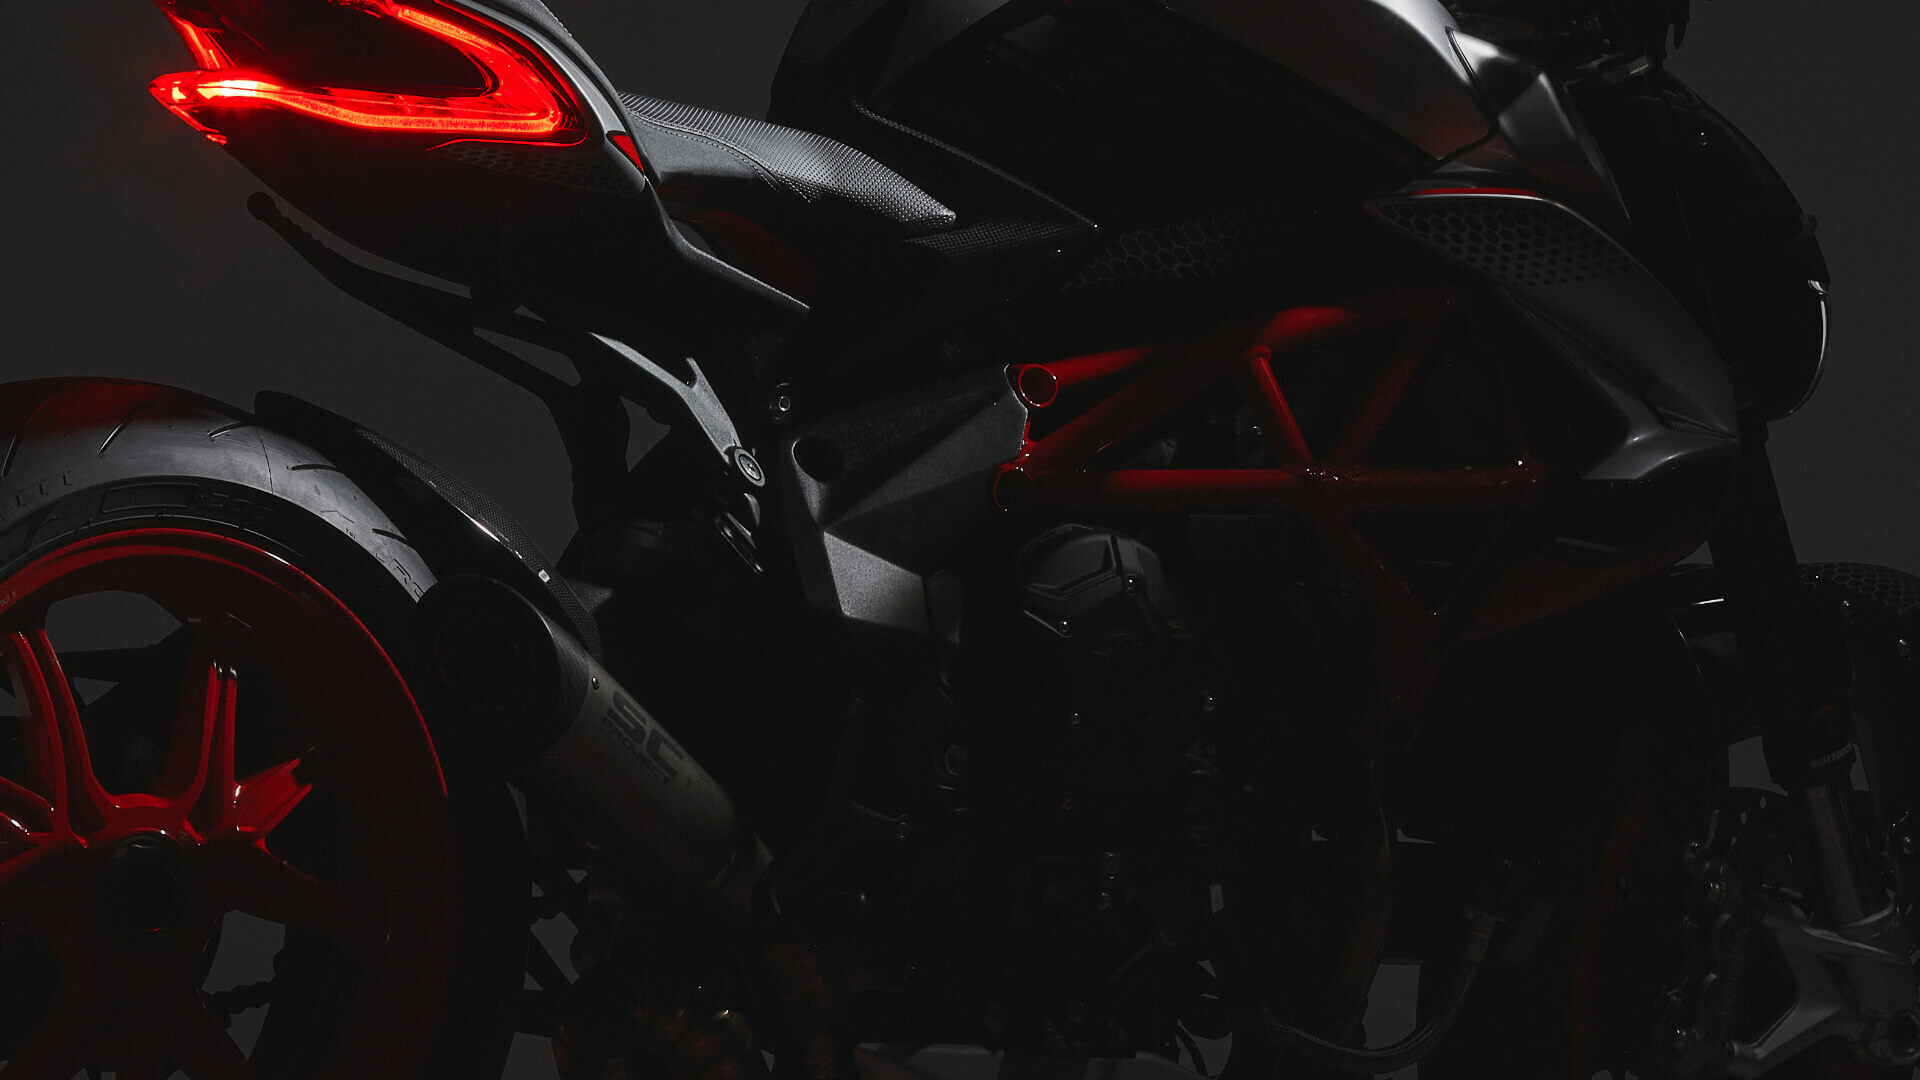 MV Agusta: RC series, Inspired by the brand's racing tradition. 1920x1080 Full HD Wallpaper.